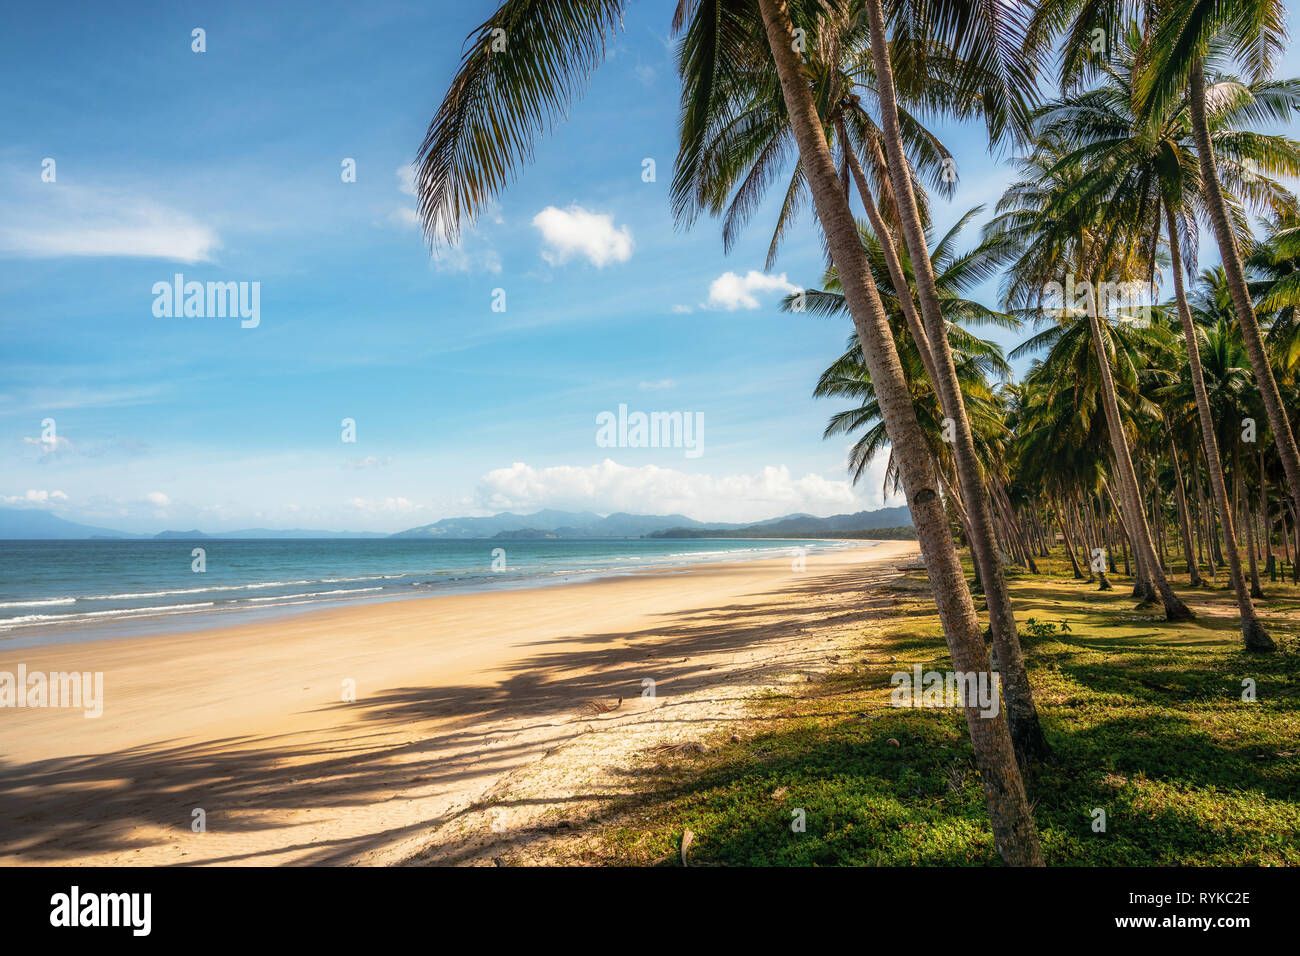 Secluded Long Beach at San Vincente with palm trees, Palawan, Philippines Stock Photo